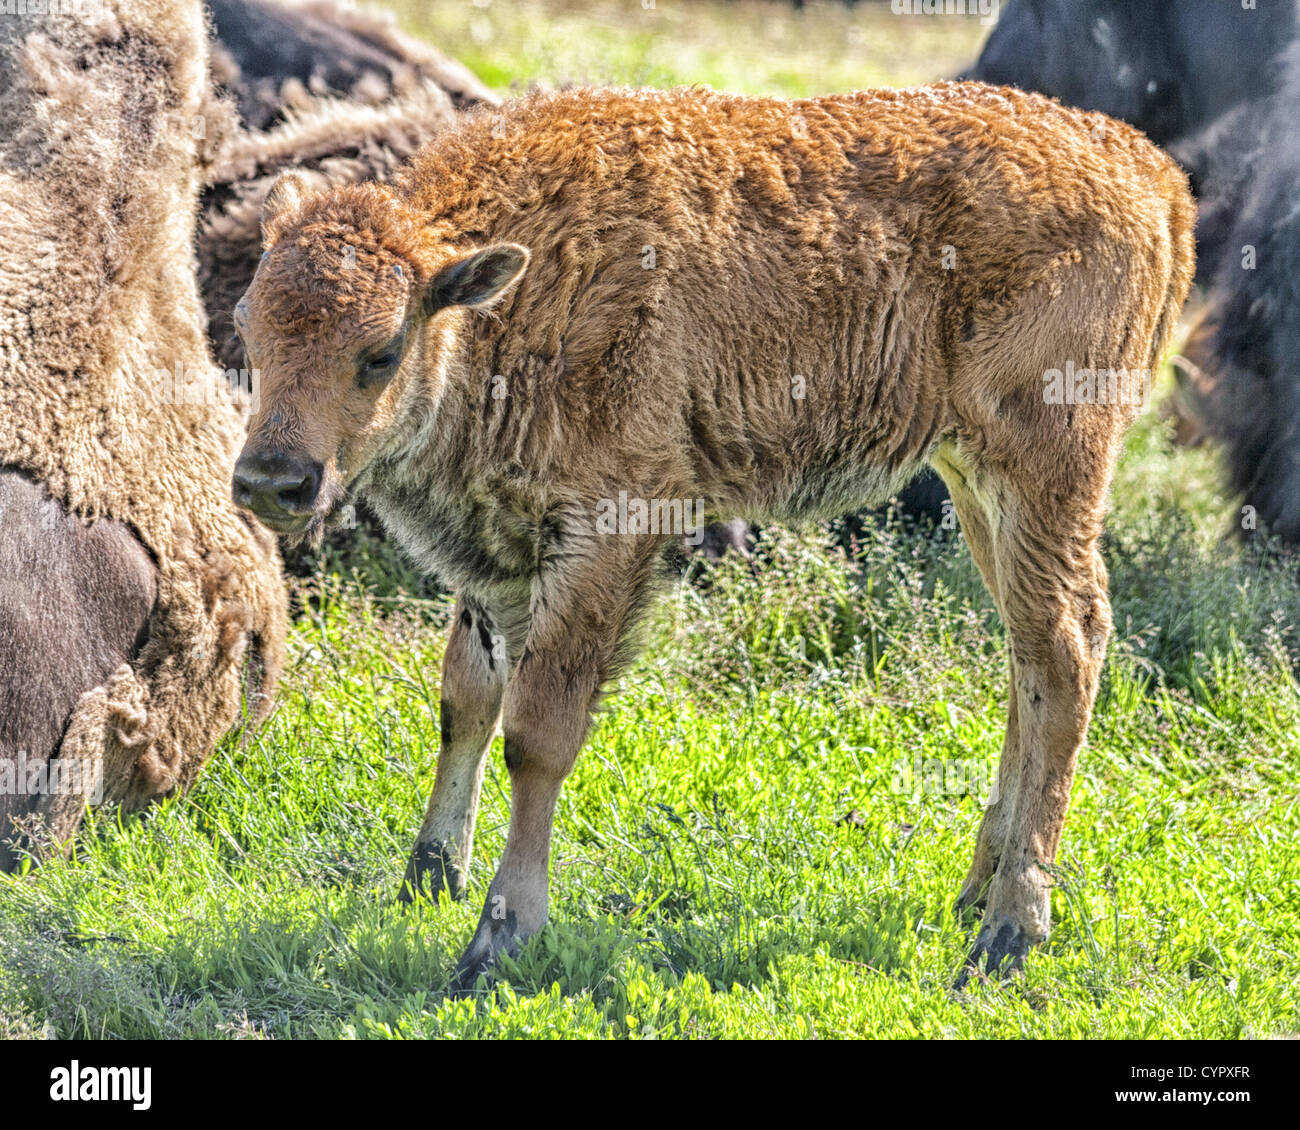 June 29, 2012 - Girdwood, Alaska, US - A wood bison calf. The wood bison  (Bison bison athabascae), a threatened species, is the largest land animal  in North America and the northern